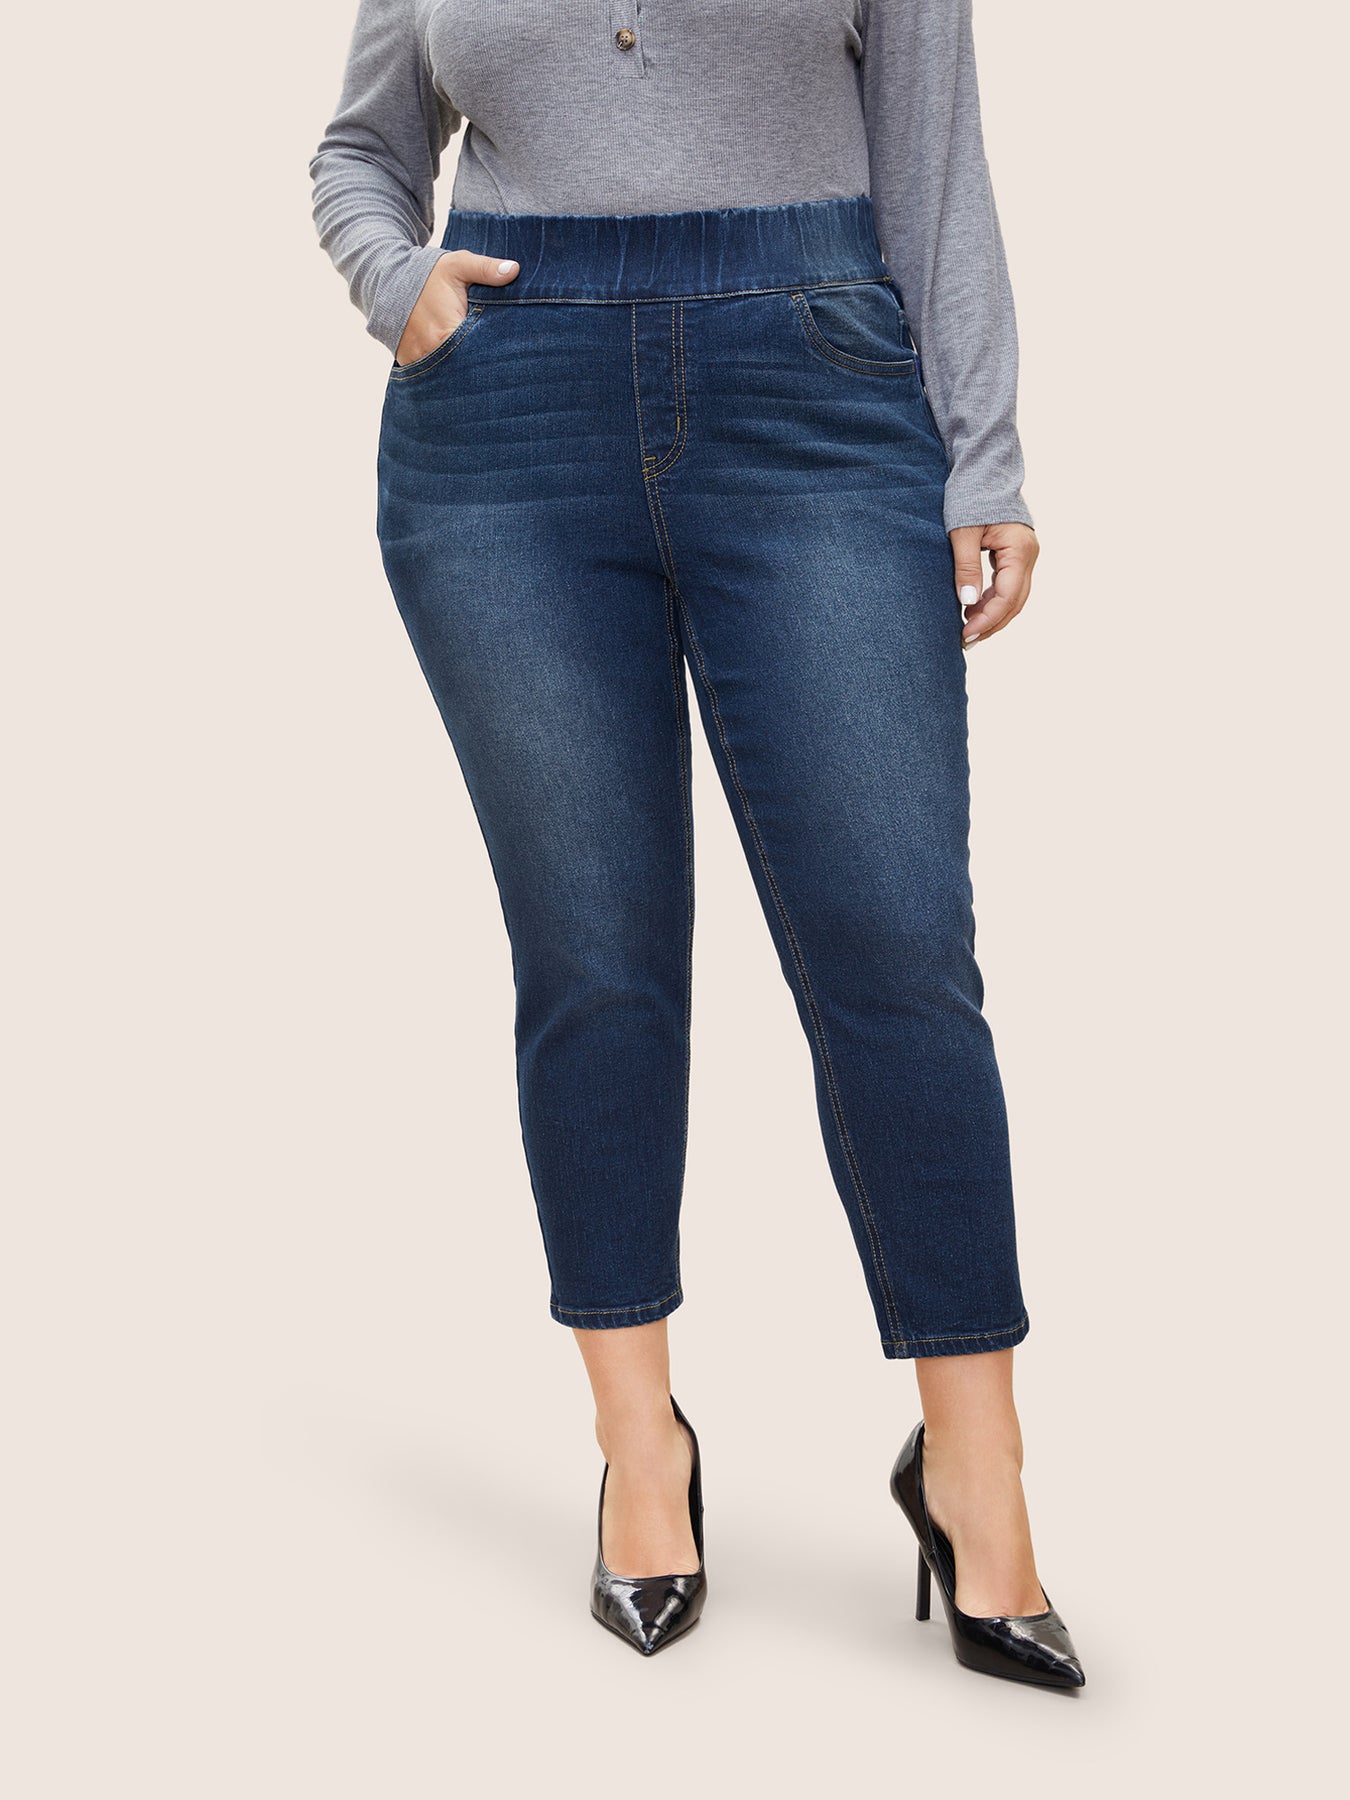 Elastic Waist Very Stretchy Slim Cropped Jeans